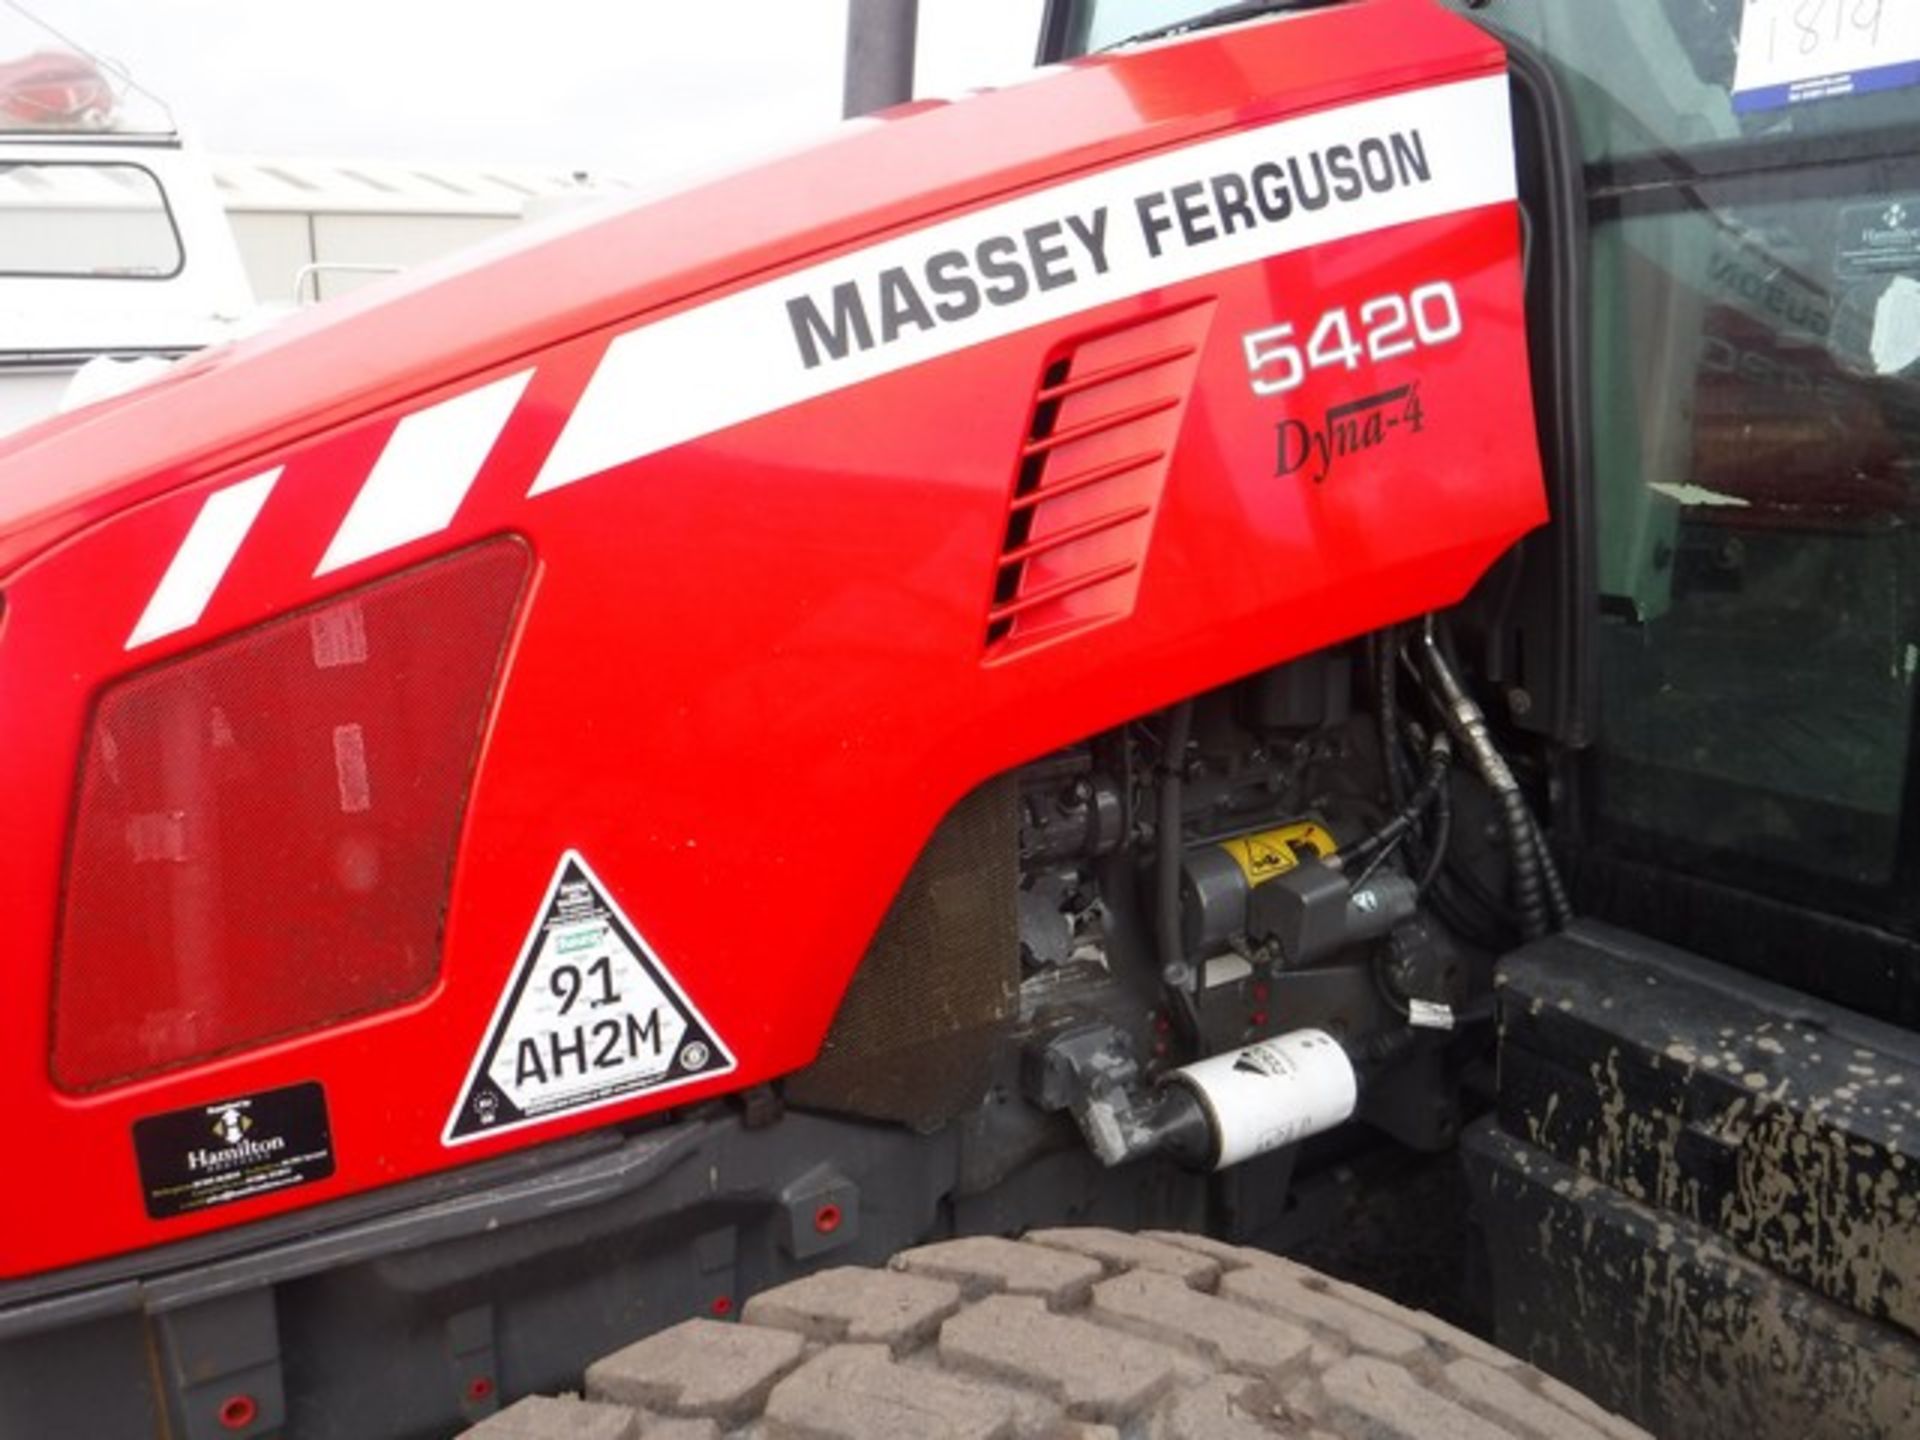 2013 MASSEY FERGUSON 5420 AGRIC TRACTOR REG - SF13HND - 4499HRS - Image 5 of 17